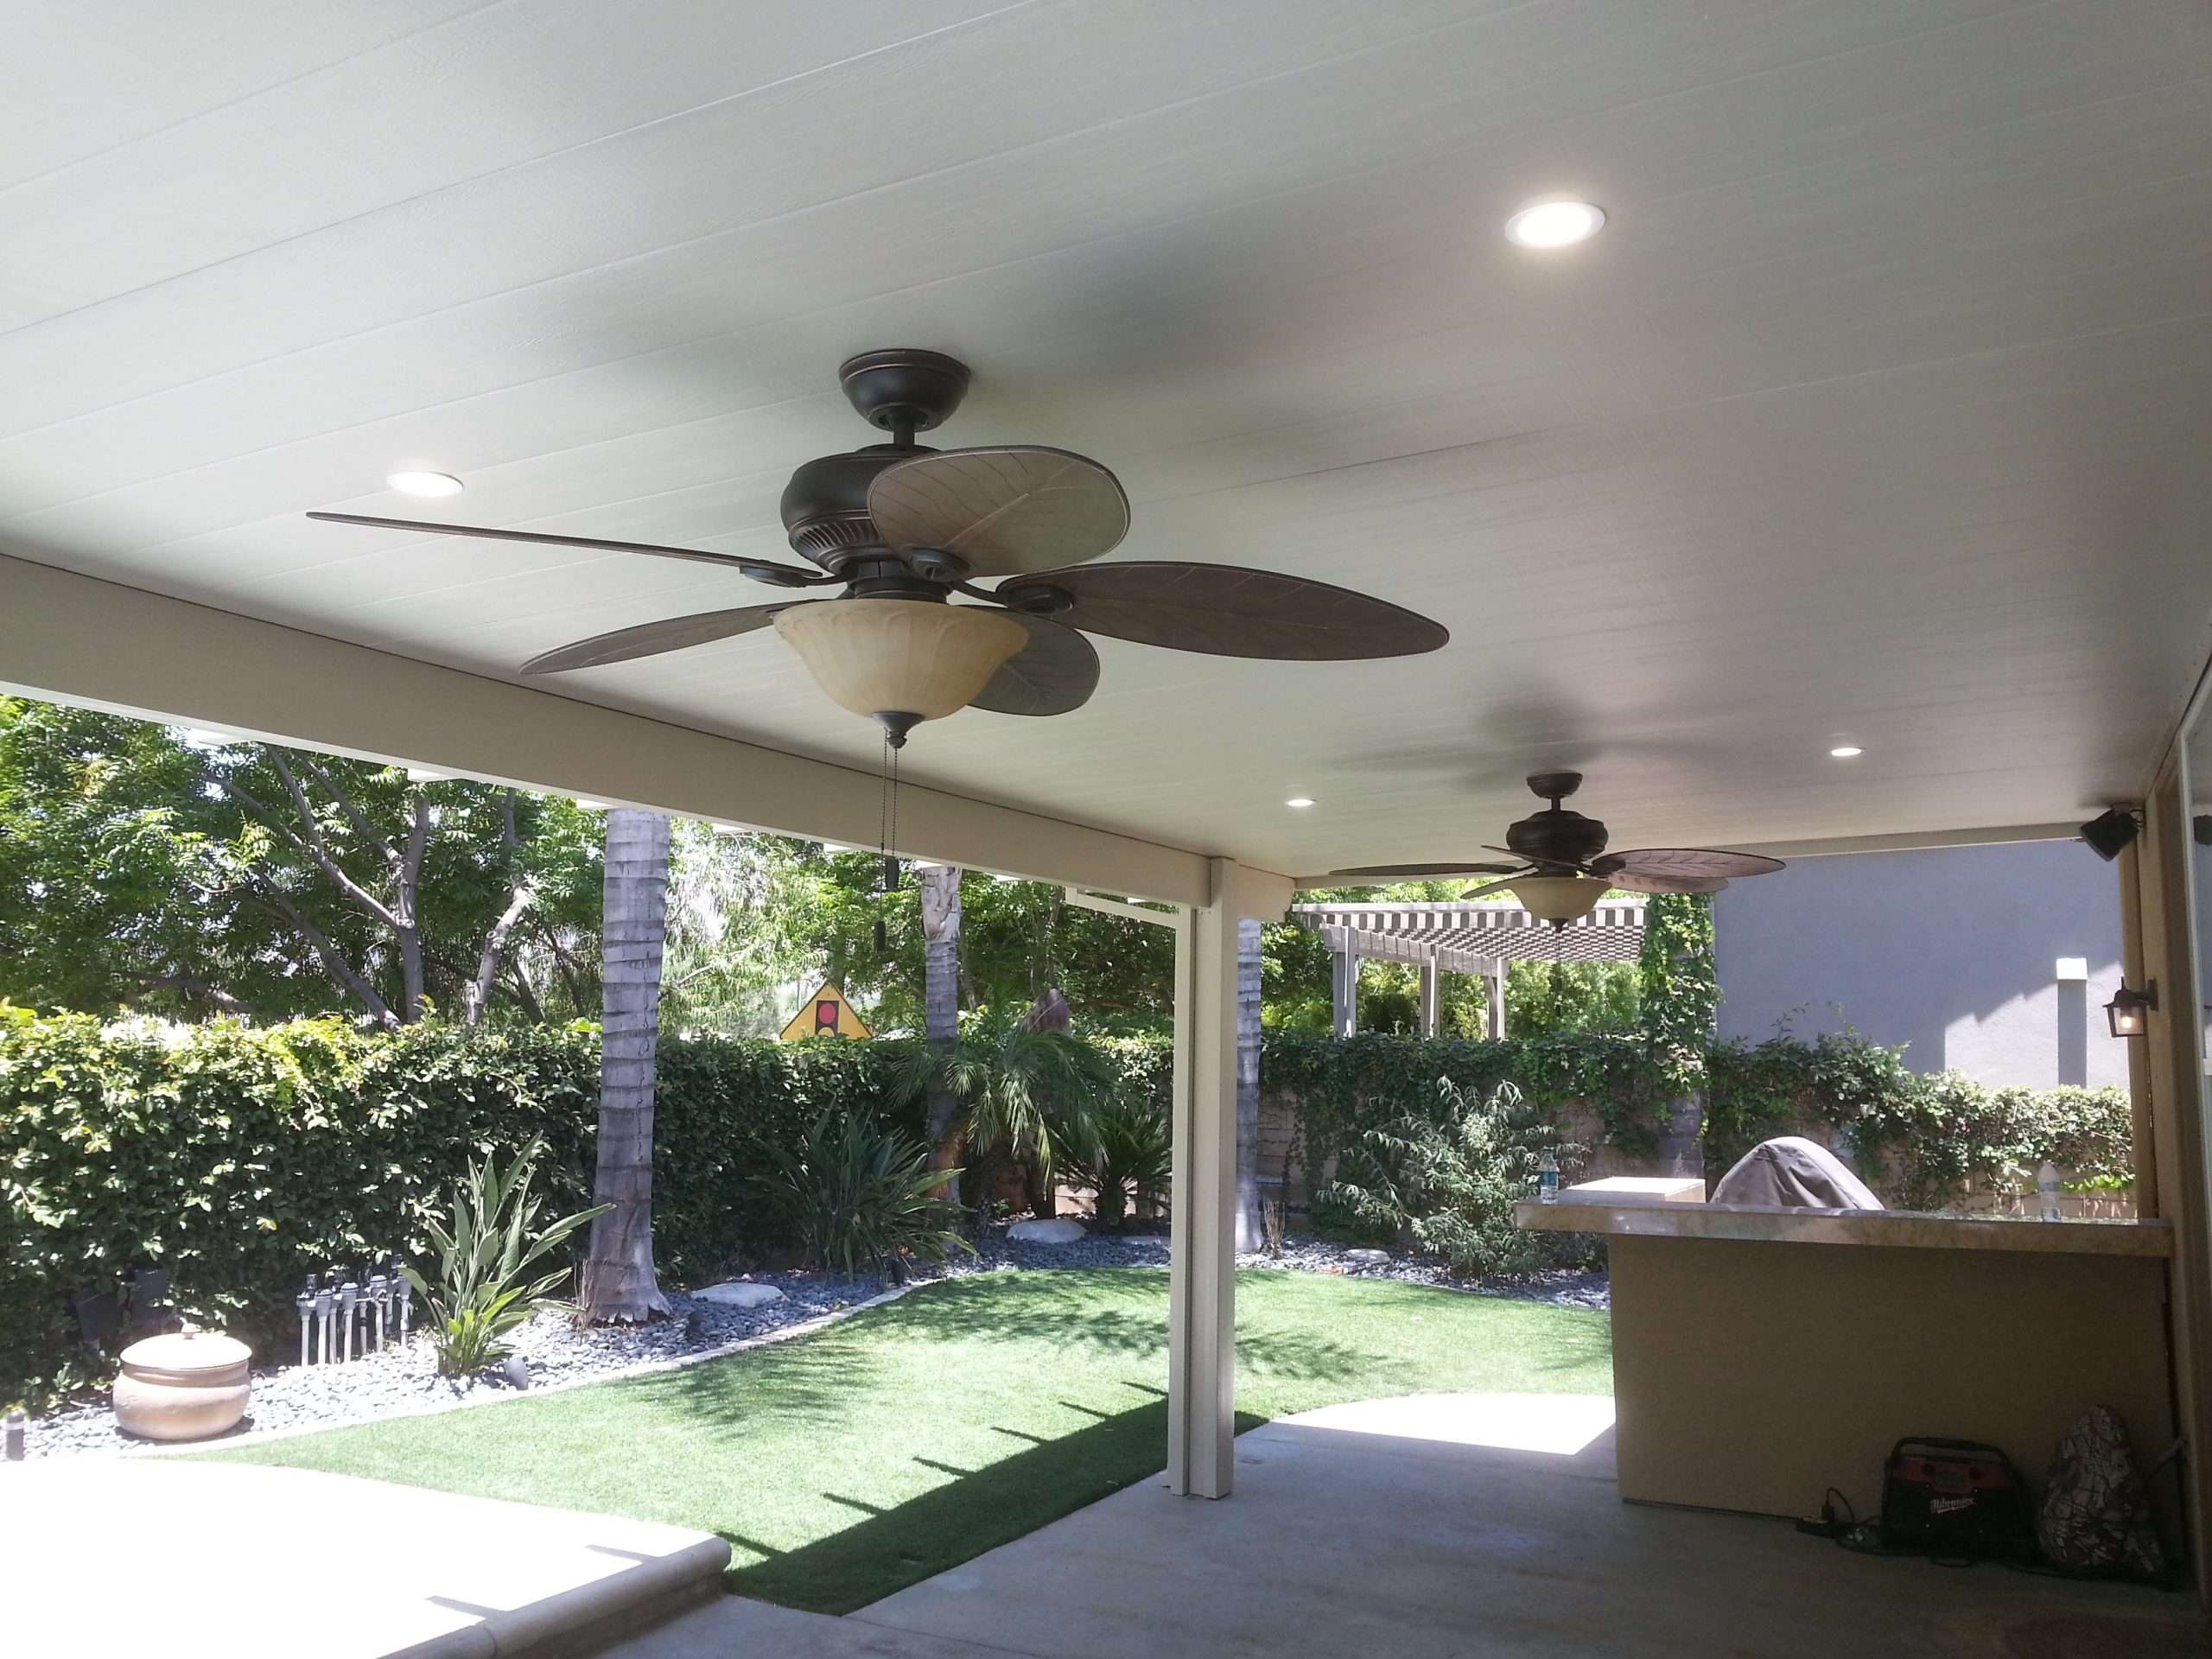 Alumawood Patio and Ceiling Fan Install